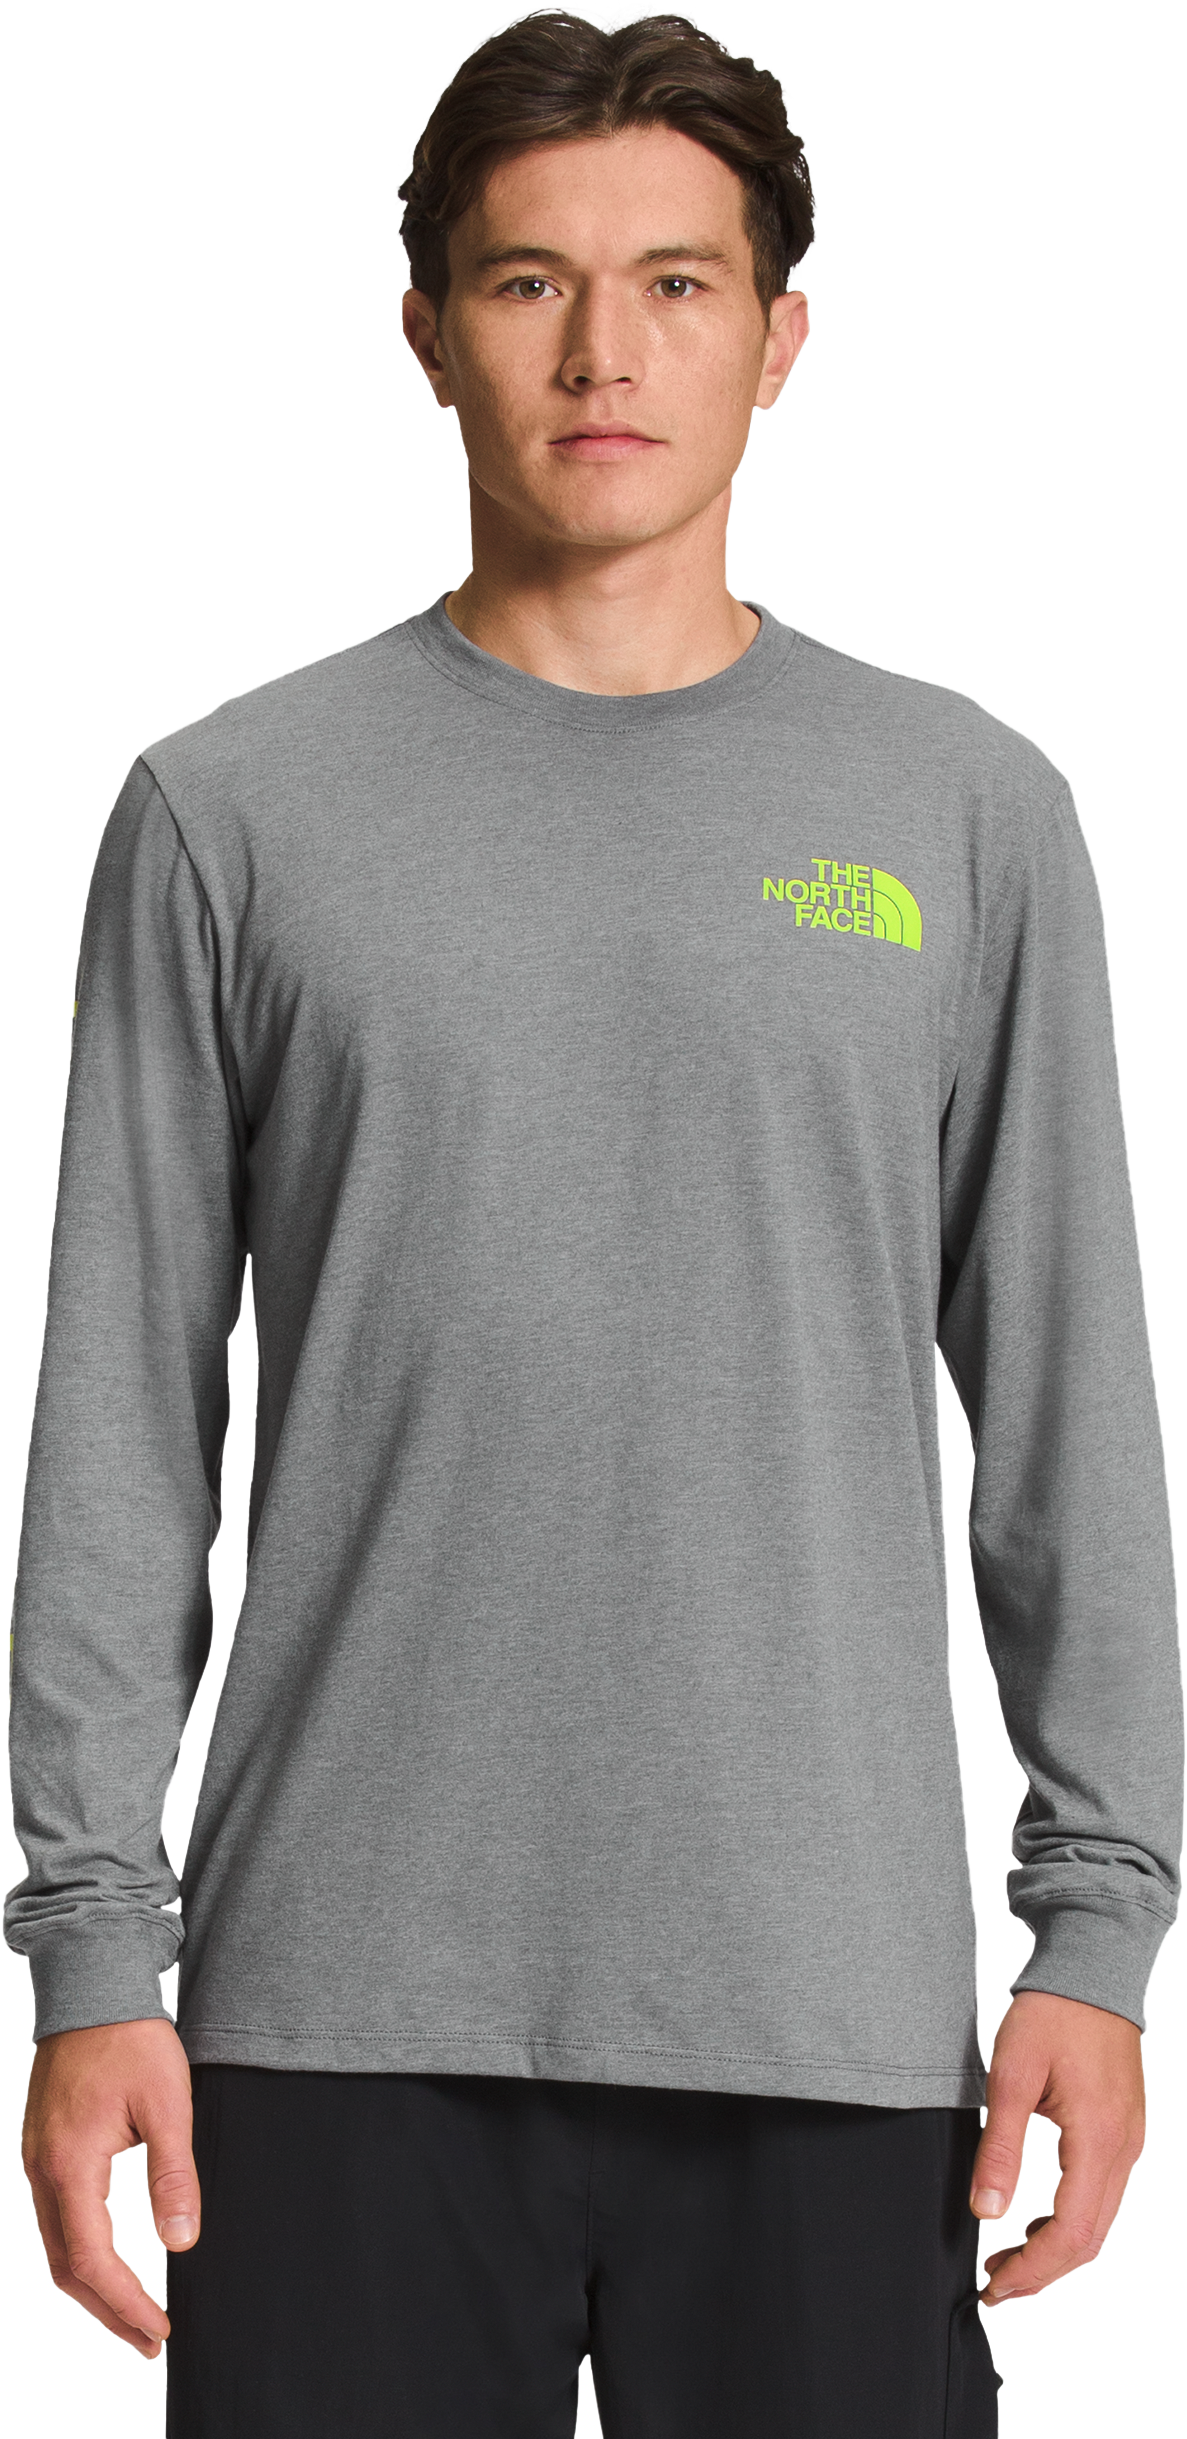 The North Face Hit Graphic Long-Sleeve T-Shirt for Men - TNF Medium Grey Heather/LED Yellow - M